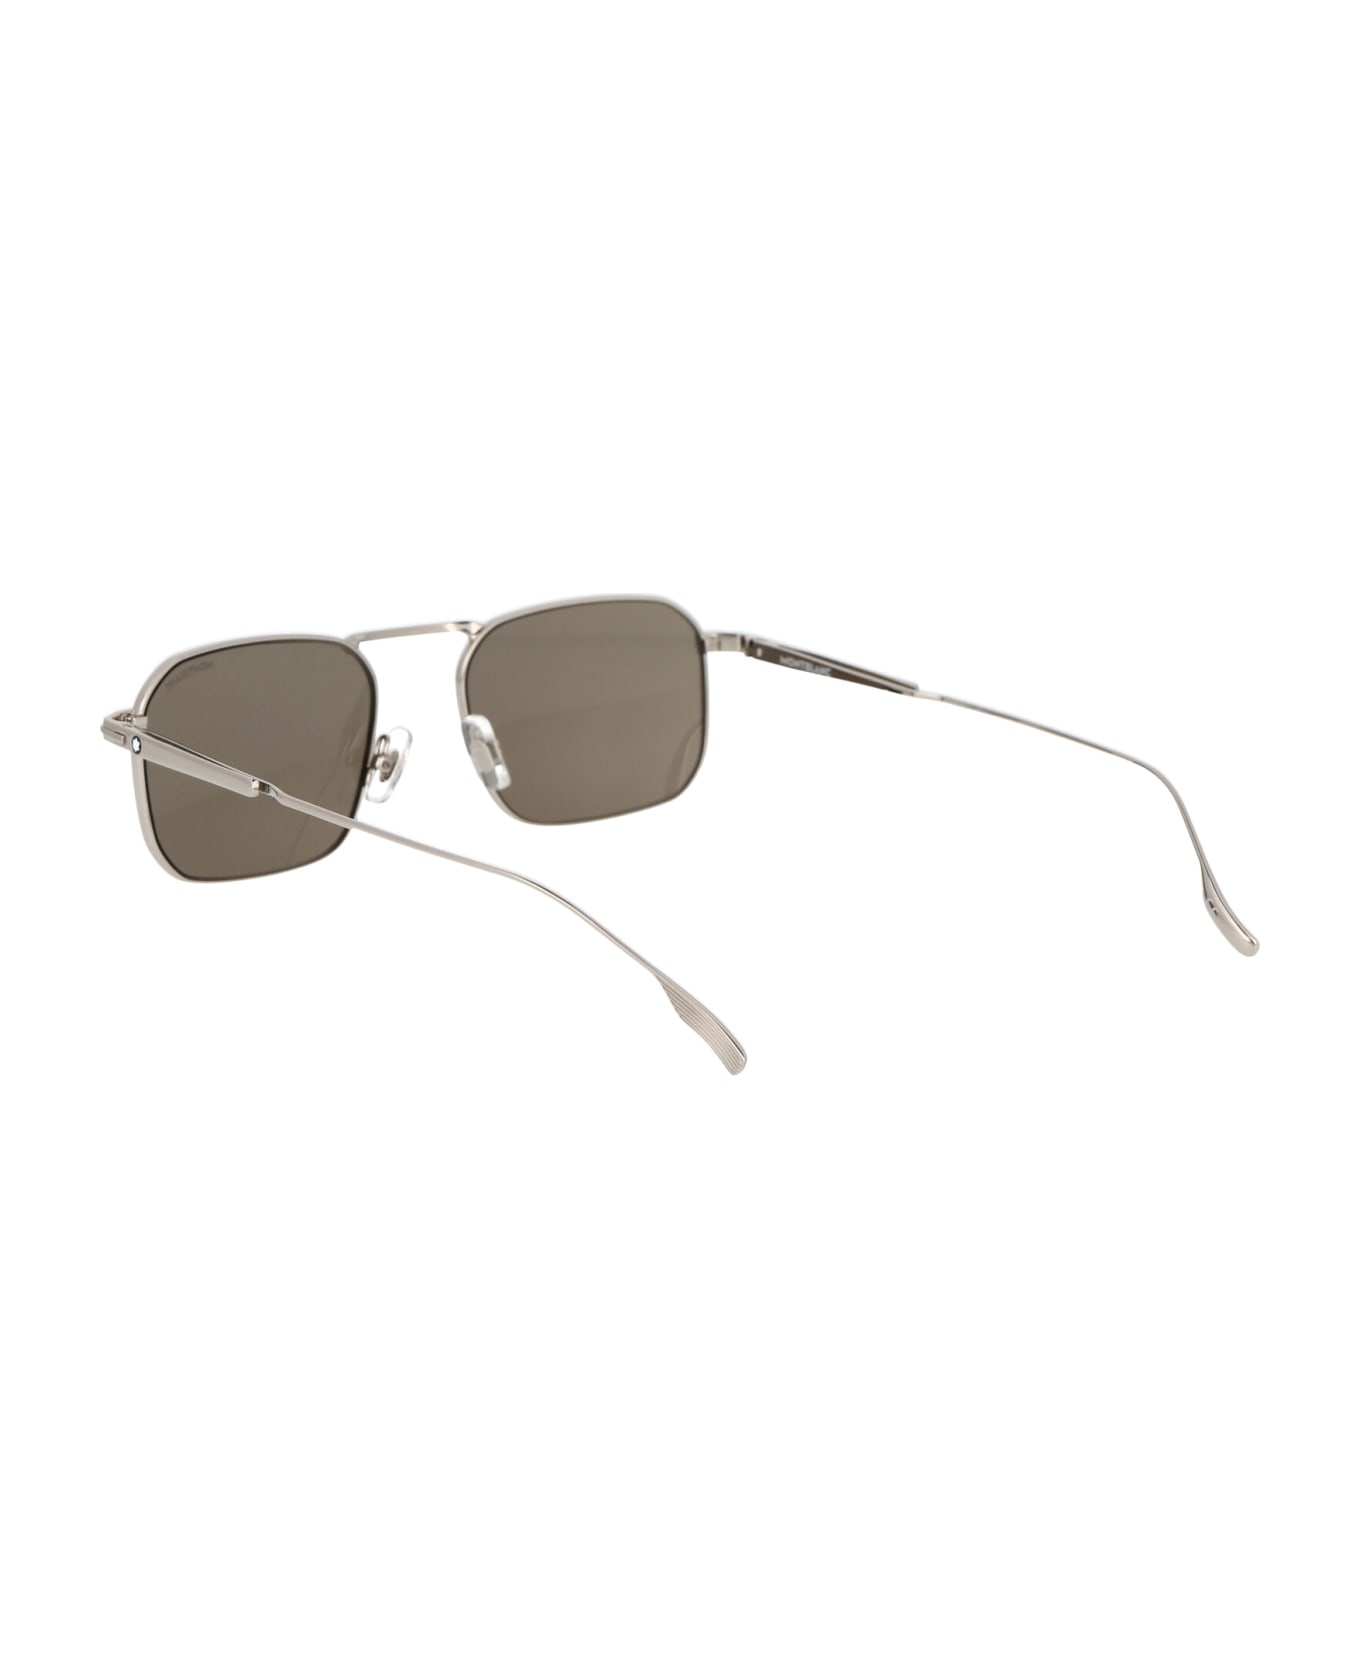 Montblanc Mb0218s Sunglasses - 003 SILVER SILVER BROWN サングラス